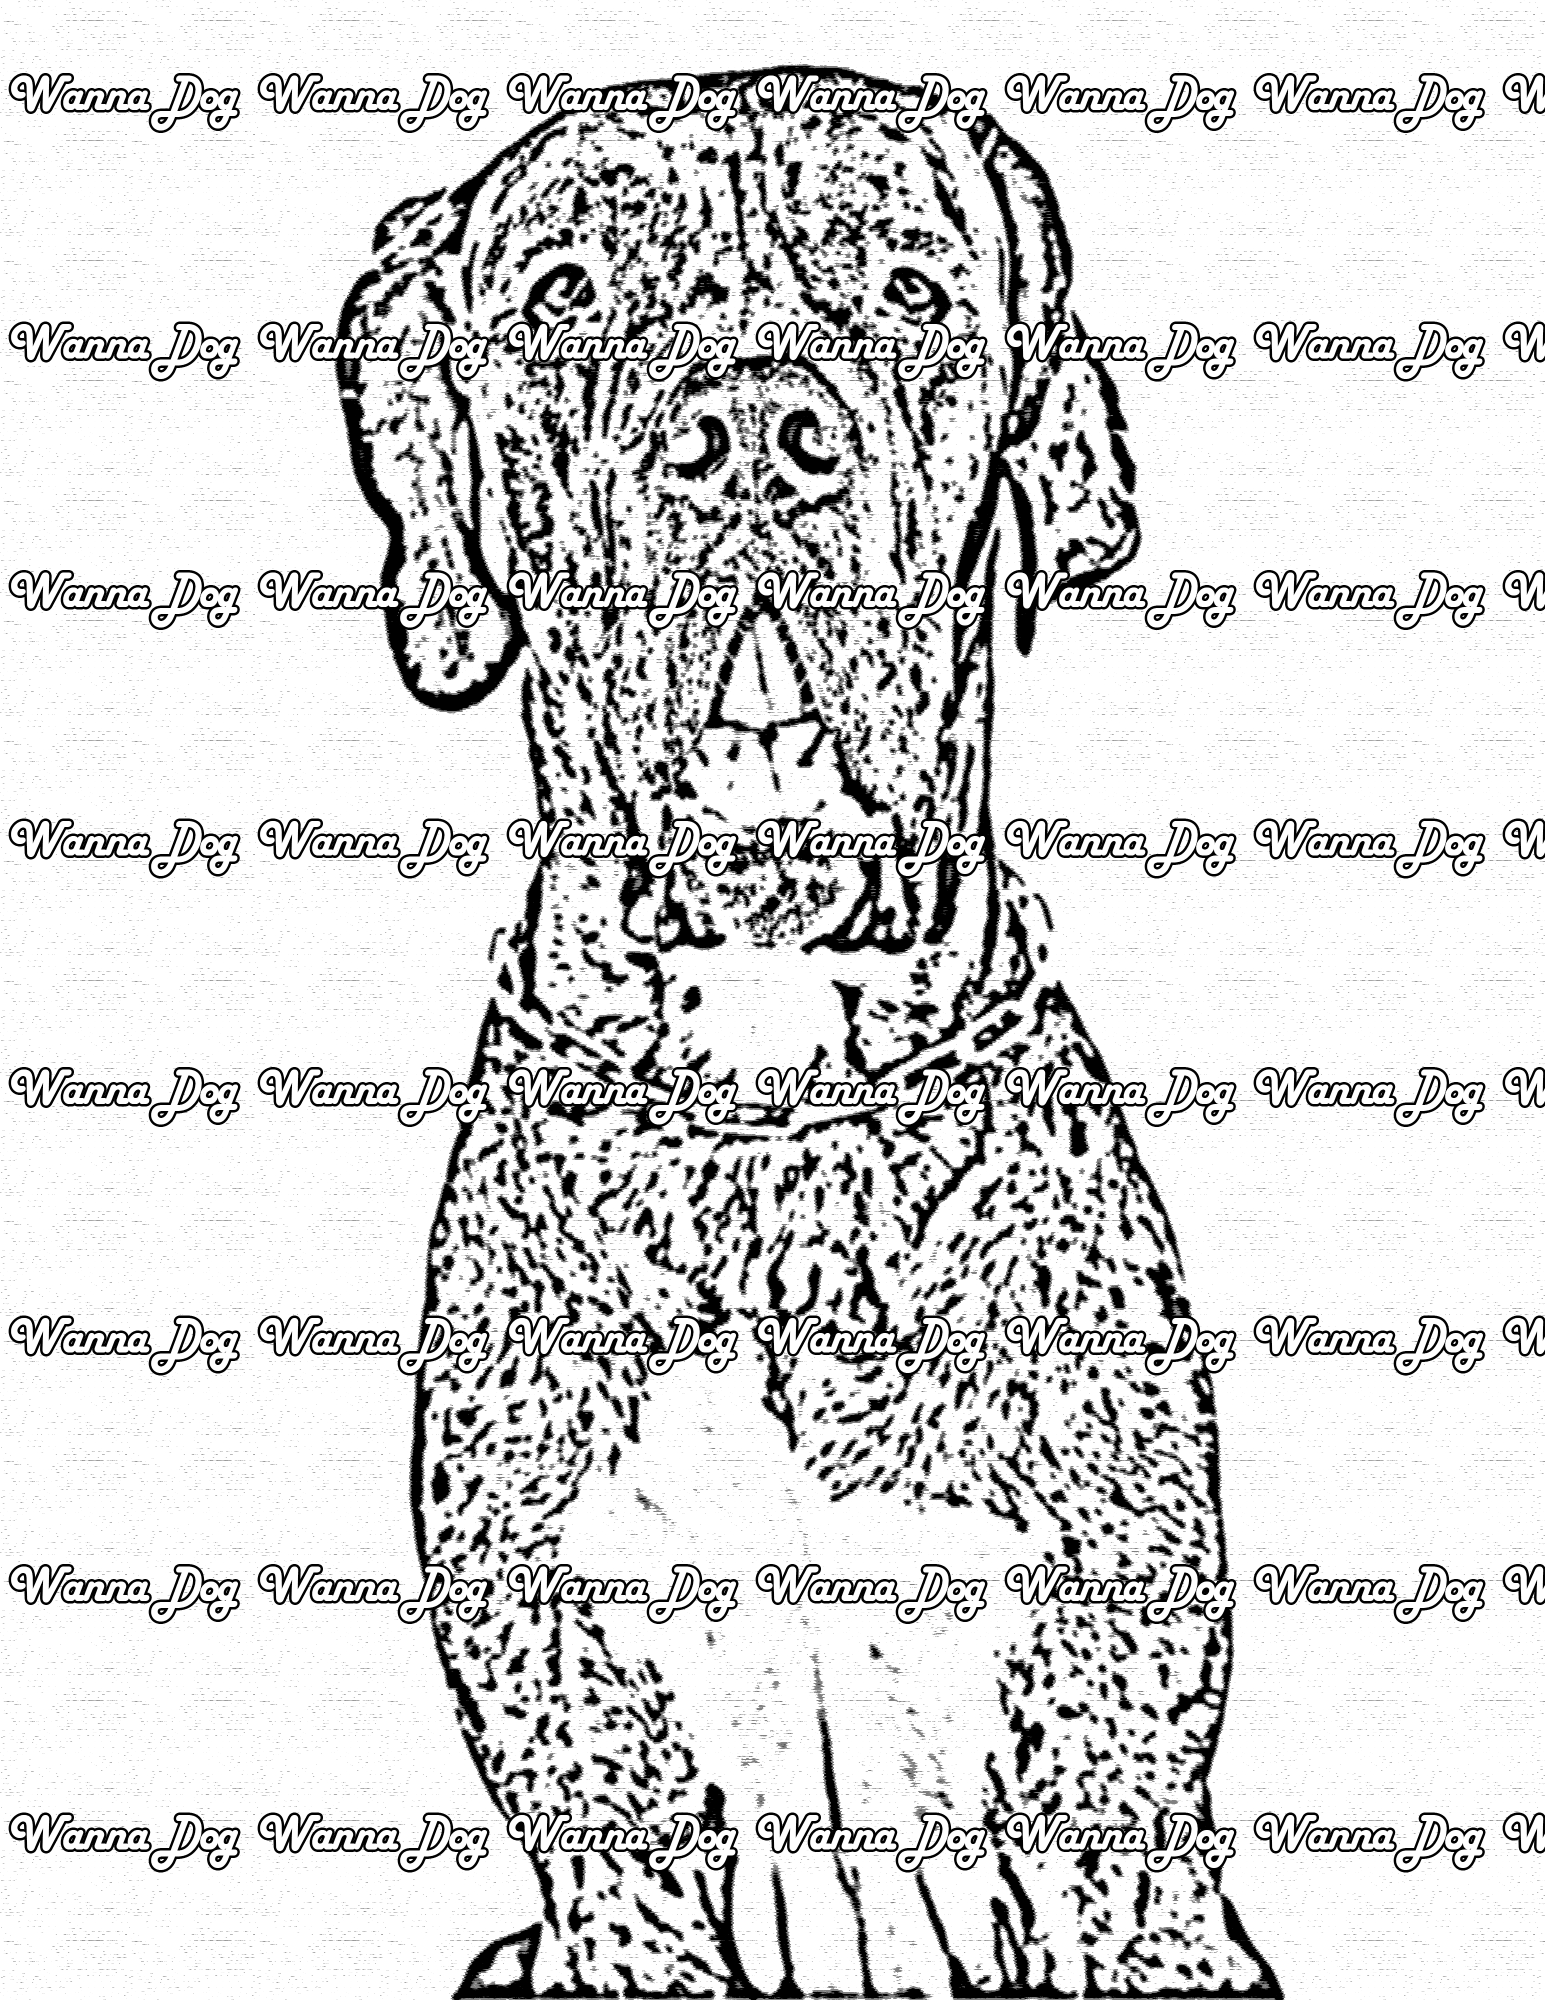 Great Dane Coloring Page of a Great Dane posing for the camera